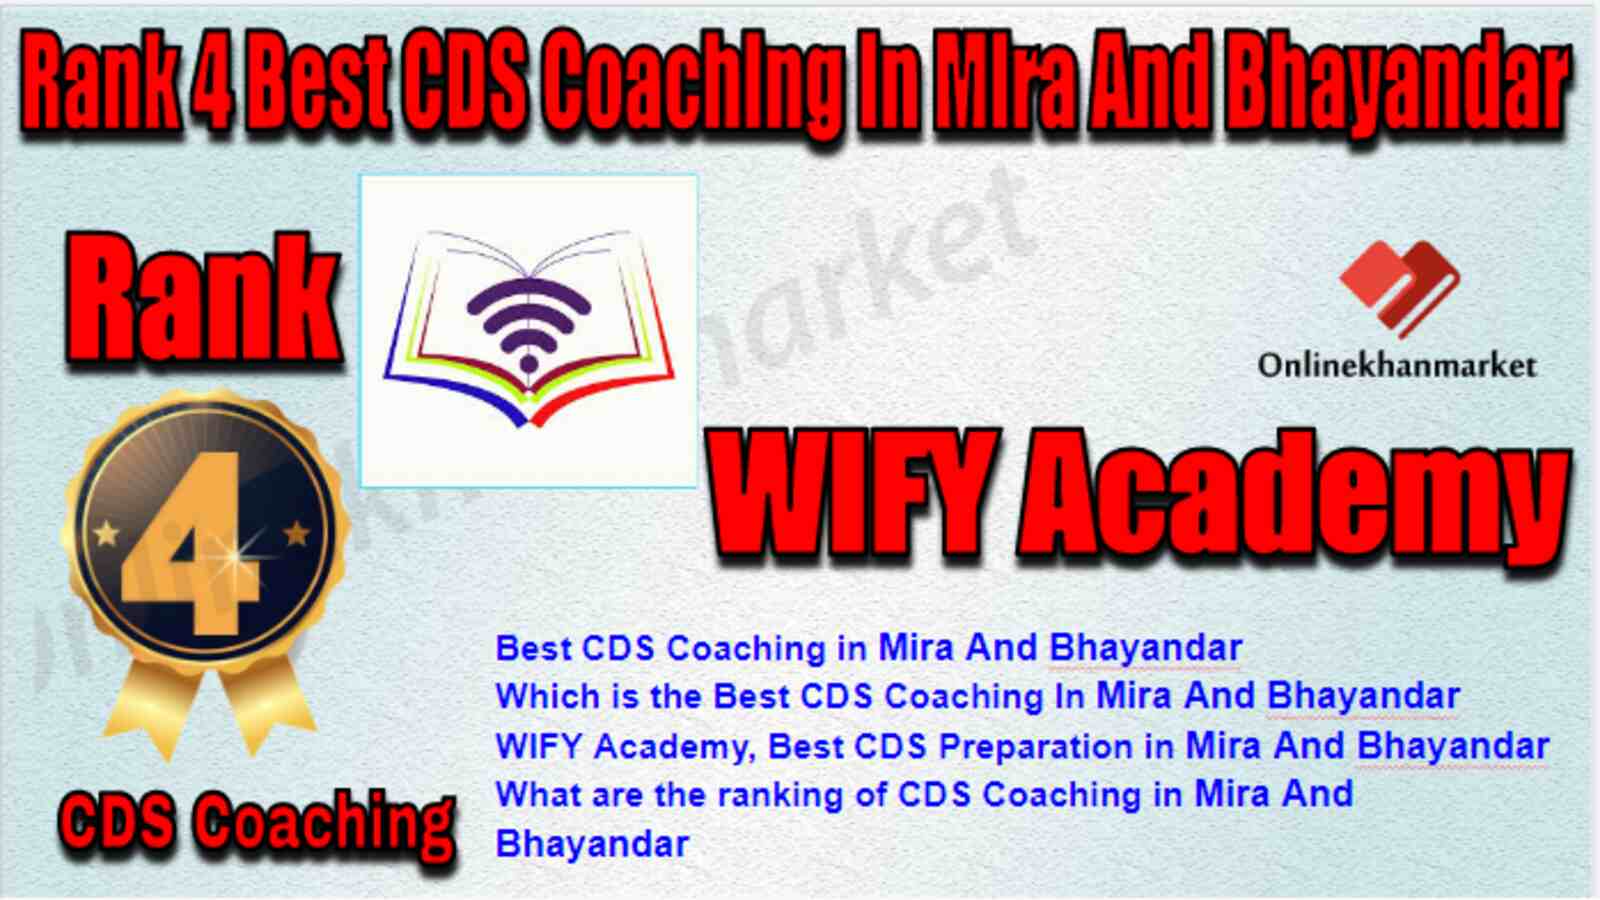 Rank 4 Best CDS Coaching in Mira and Bhayandar